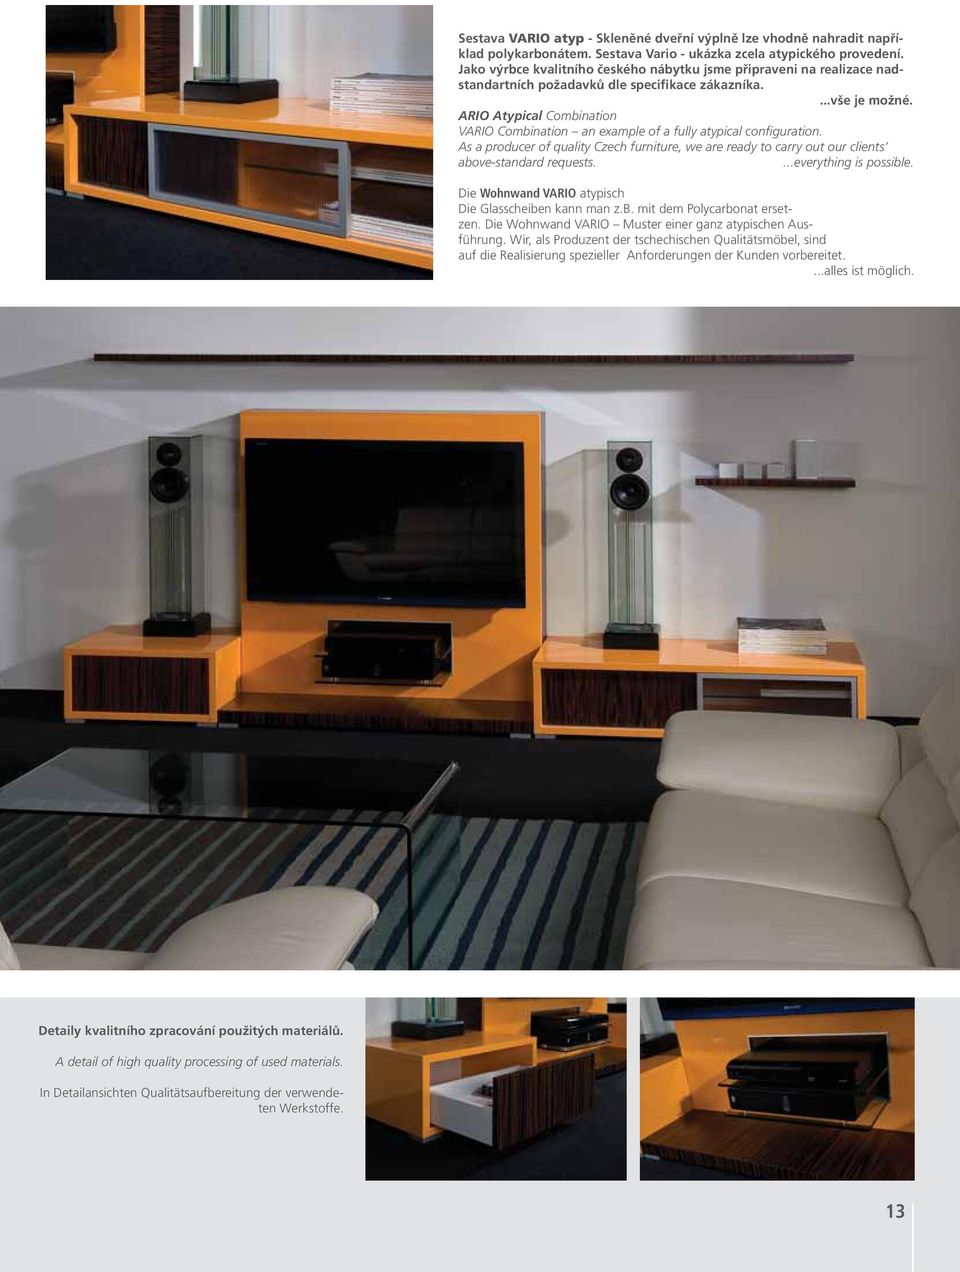 ARIO Atypical Combination VARIO Combination an example of a fully atypical configuration. As a producer of quality Czech furniture, we are ready to carry out our clients above-standard requests.